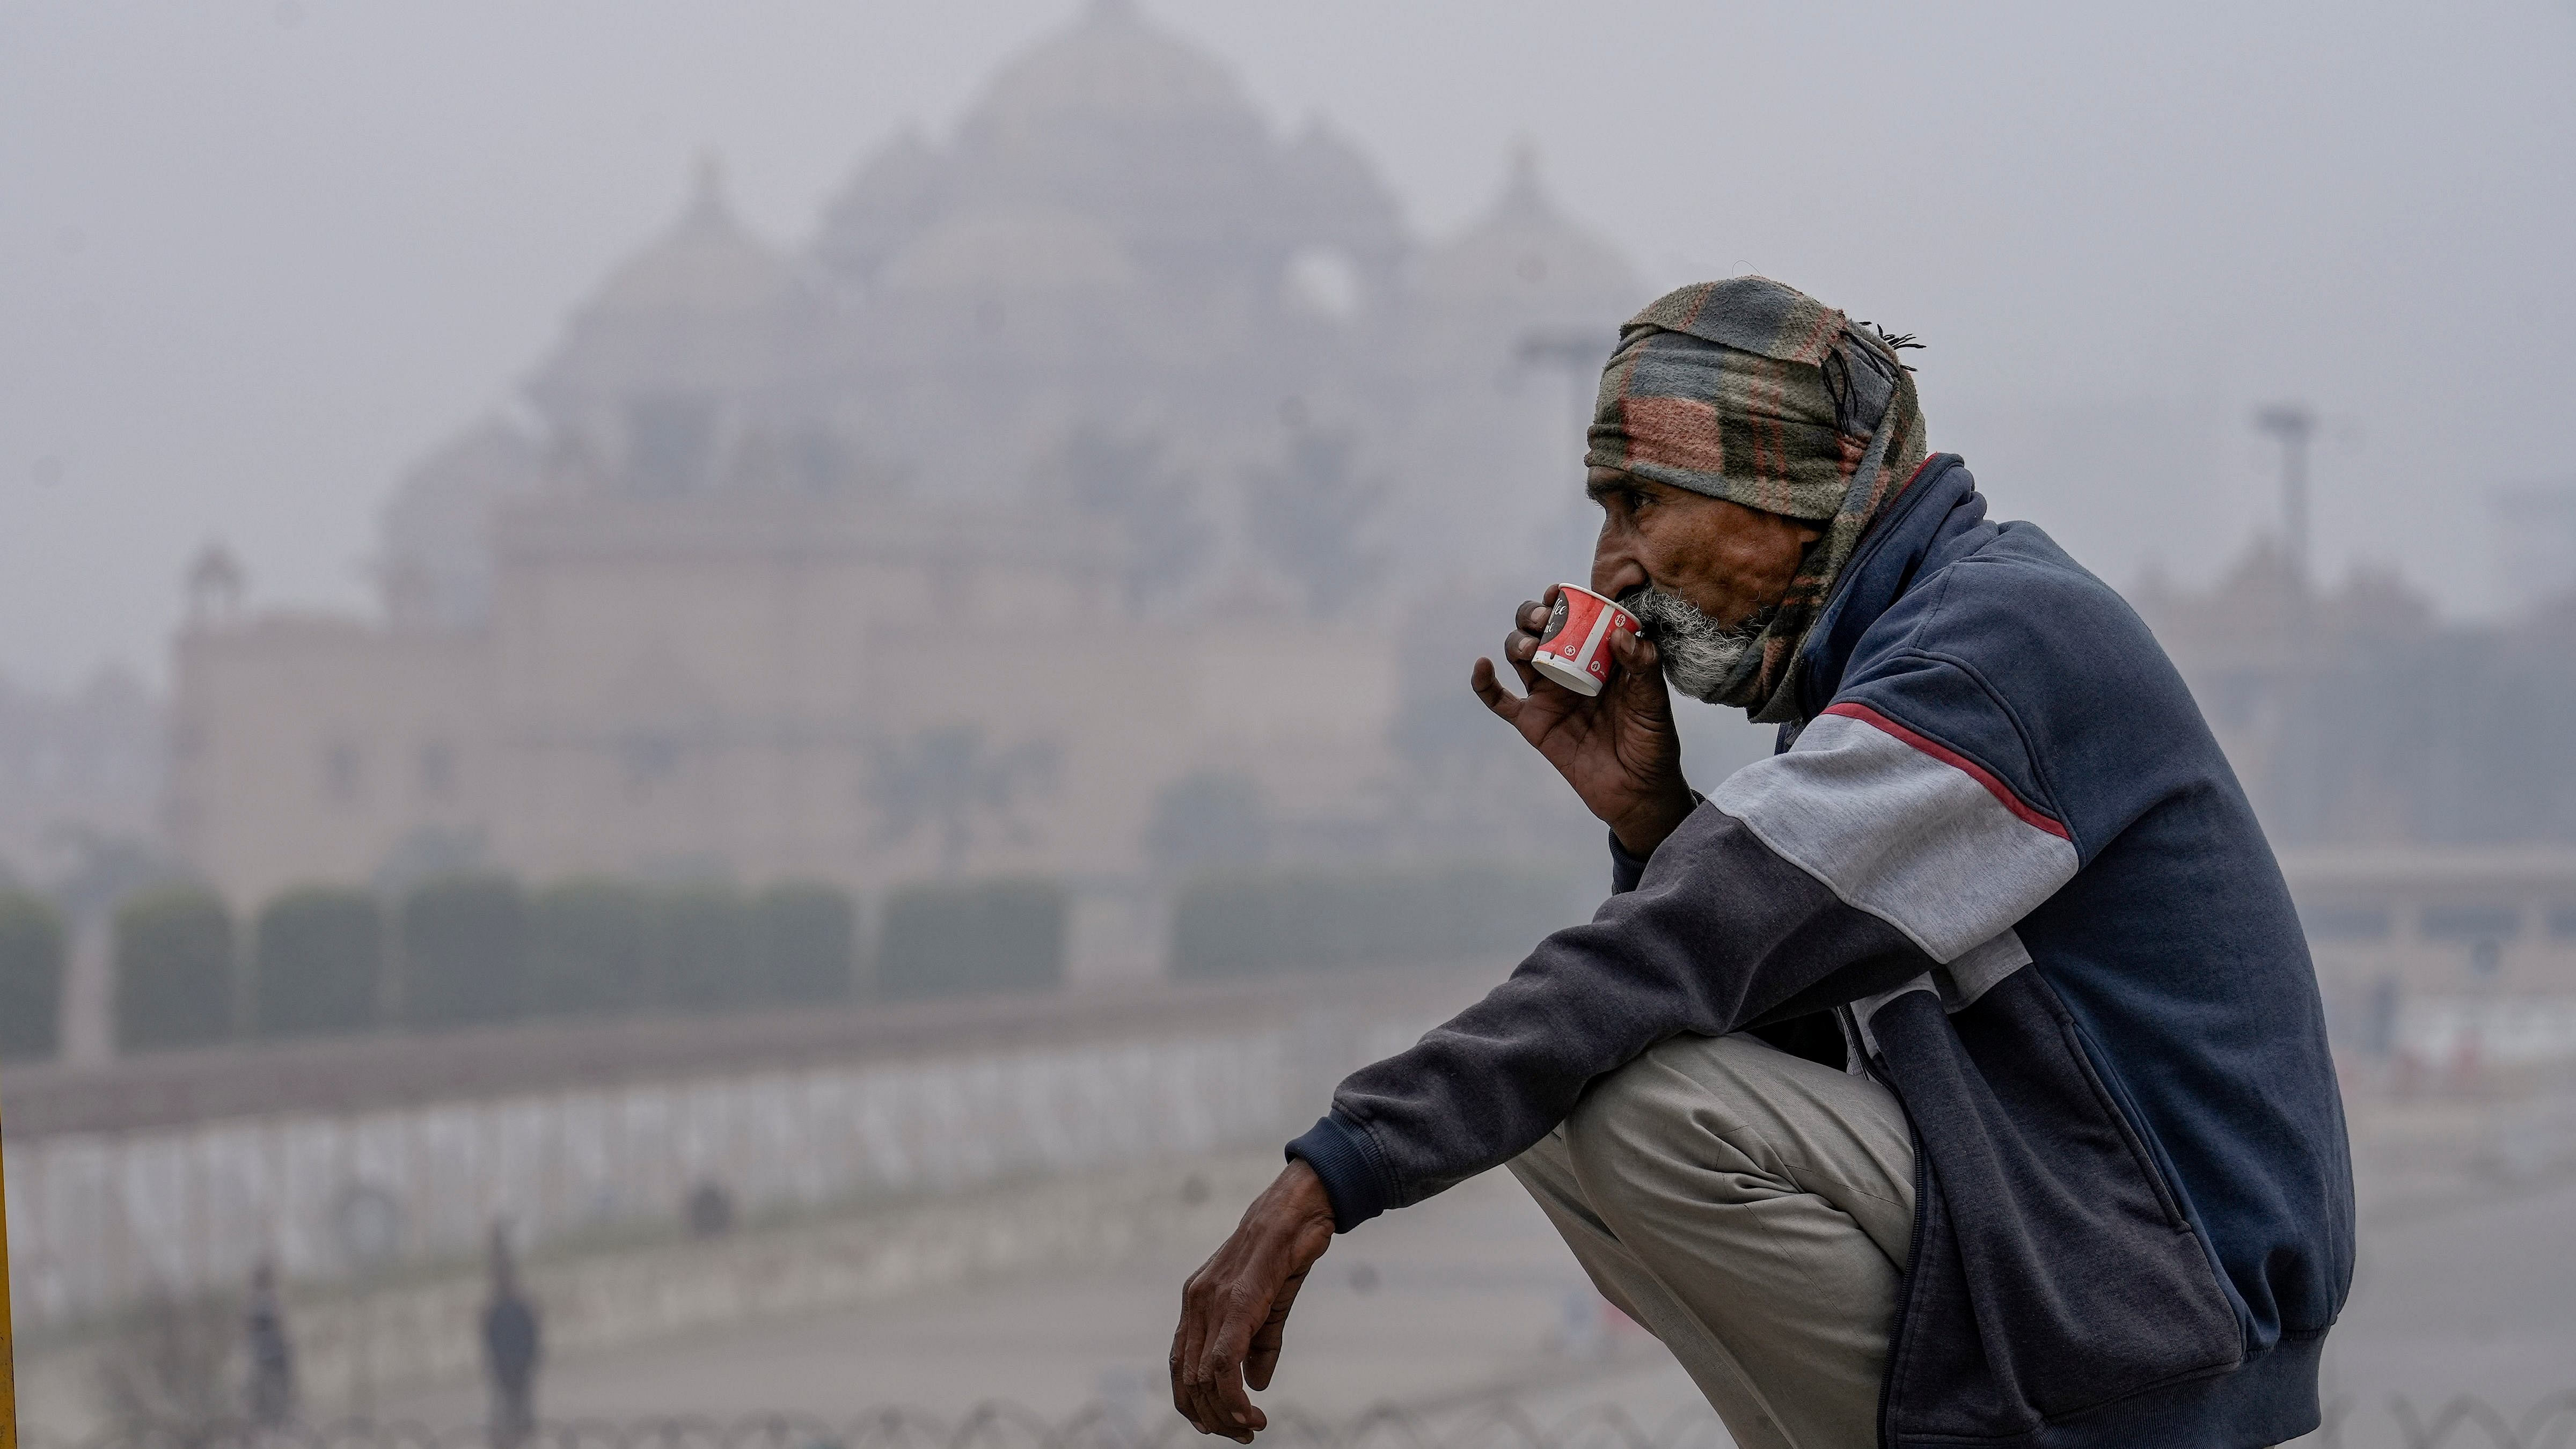 Delhi saw an intense cold wave spell from January 5 to January 9, the second longest in the month in a decade, according to IMD data. Credit: PTI File Photo